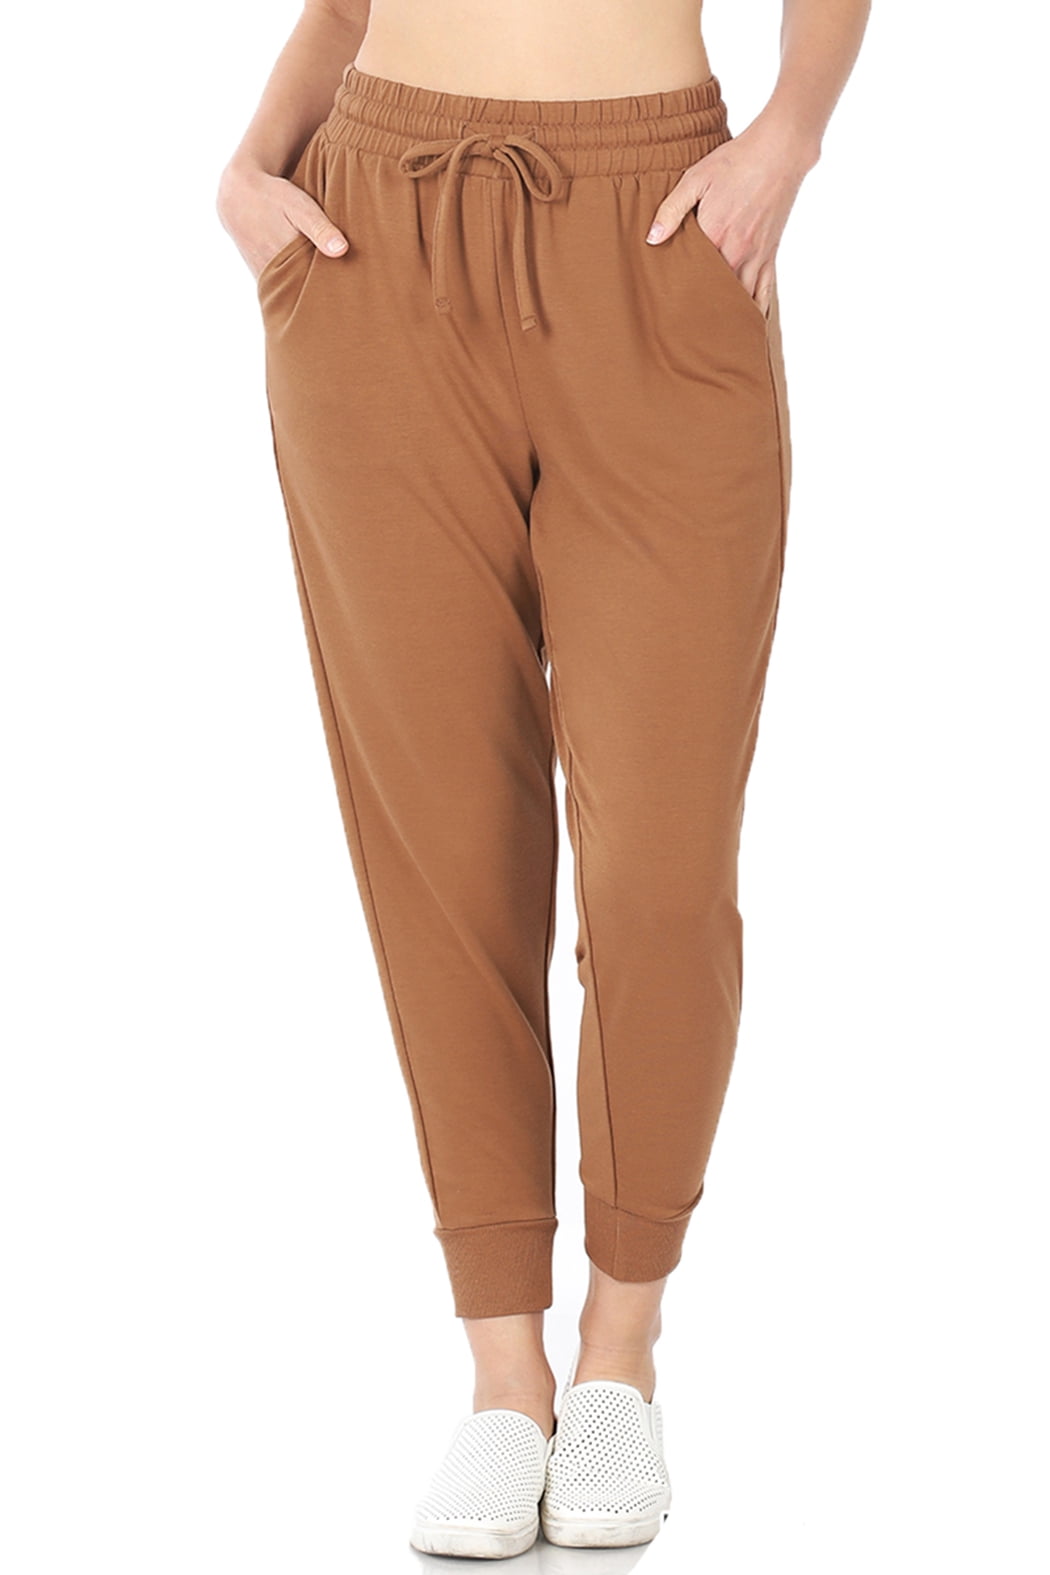 Women's Relax Fit Cropped Jogger Lounge Sweatpants Running Pants (Deep  Camel, Large)